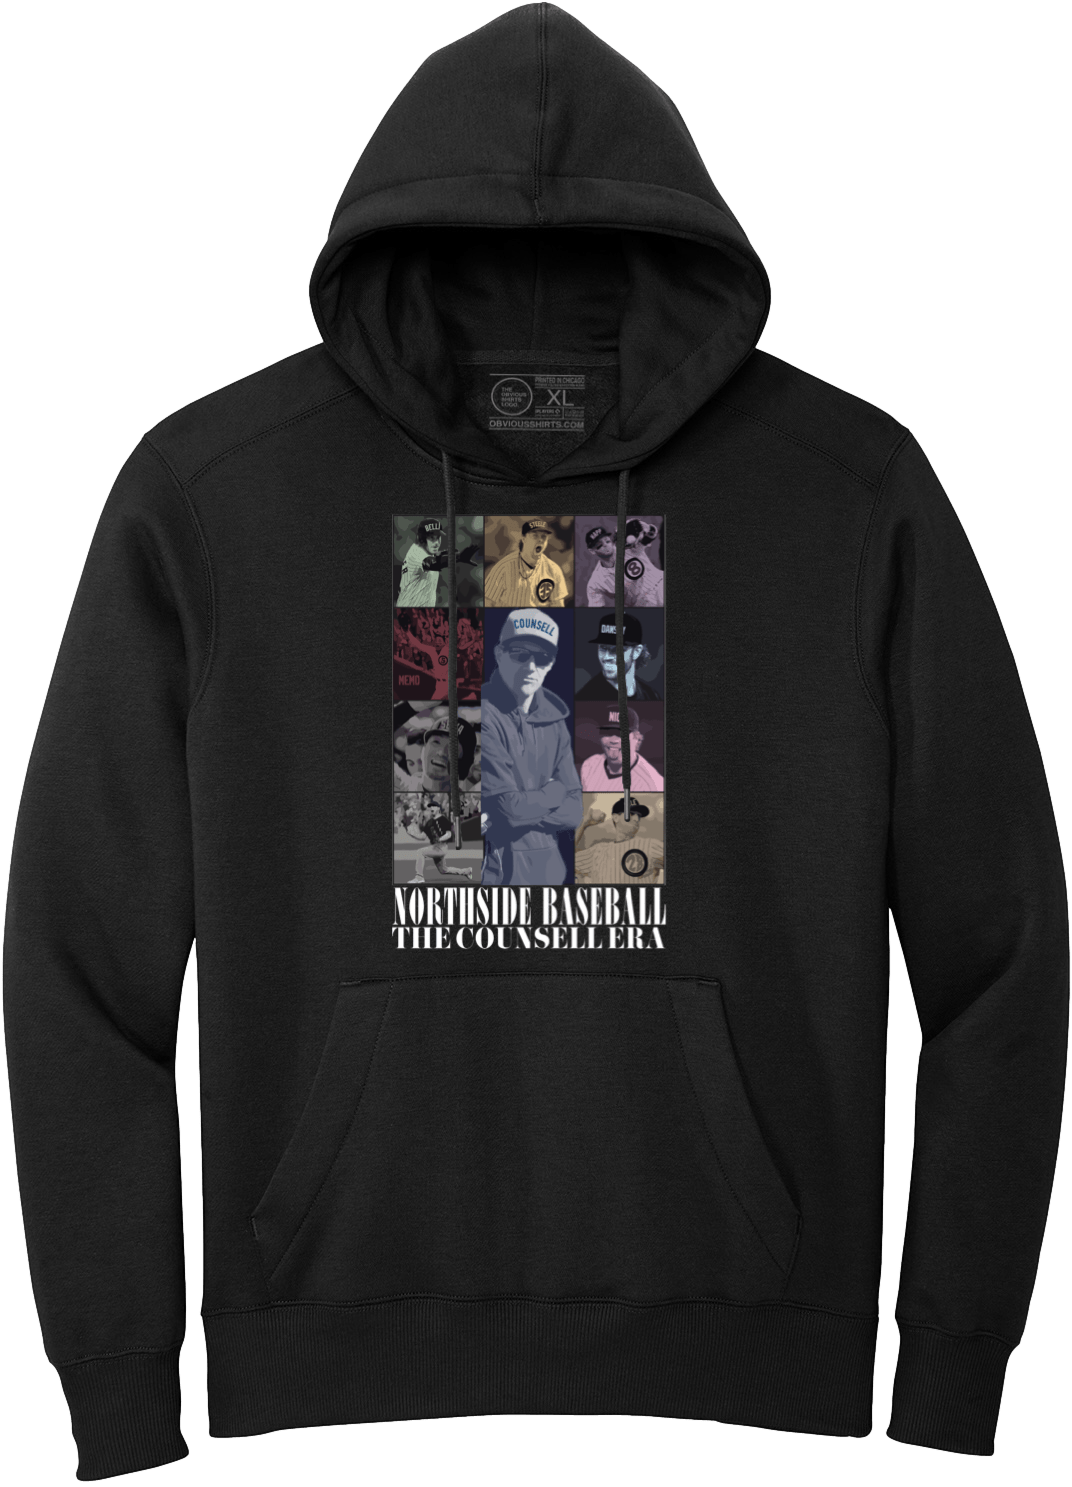 IN OUR COUNSELL ERA. (HOODED SWEATSHIRT) - OBVIOUS SHIRTS